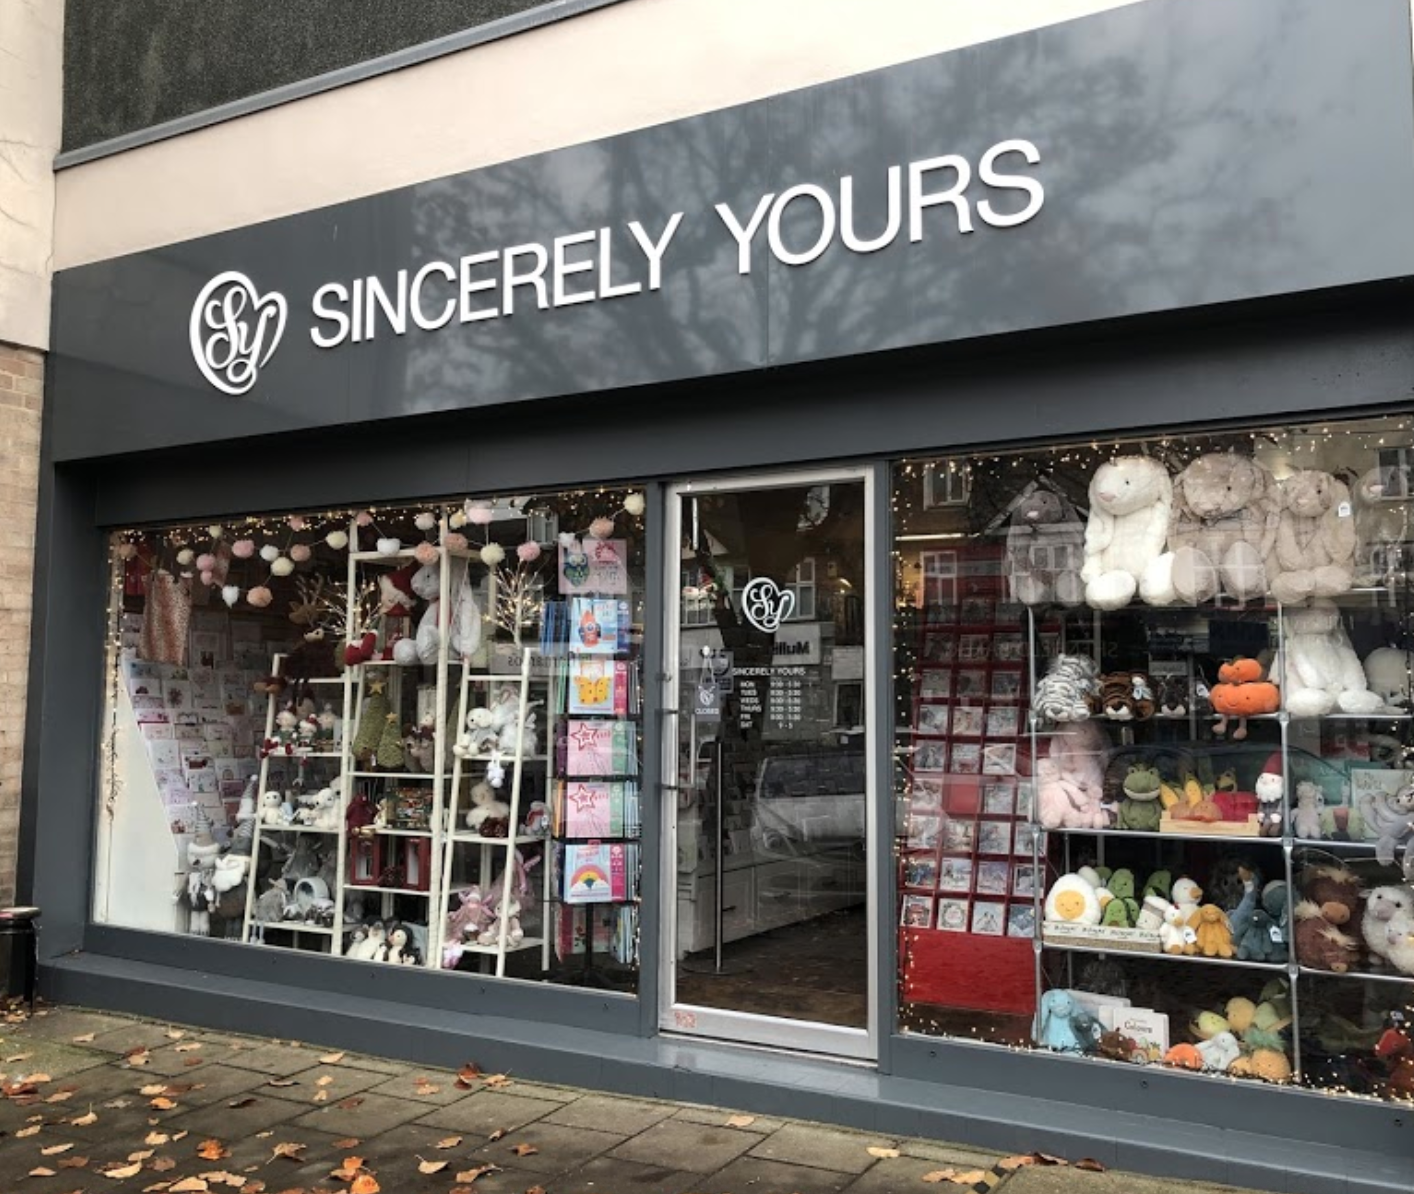 Above: Sincerely Yours are well supported shops by their local customers.